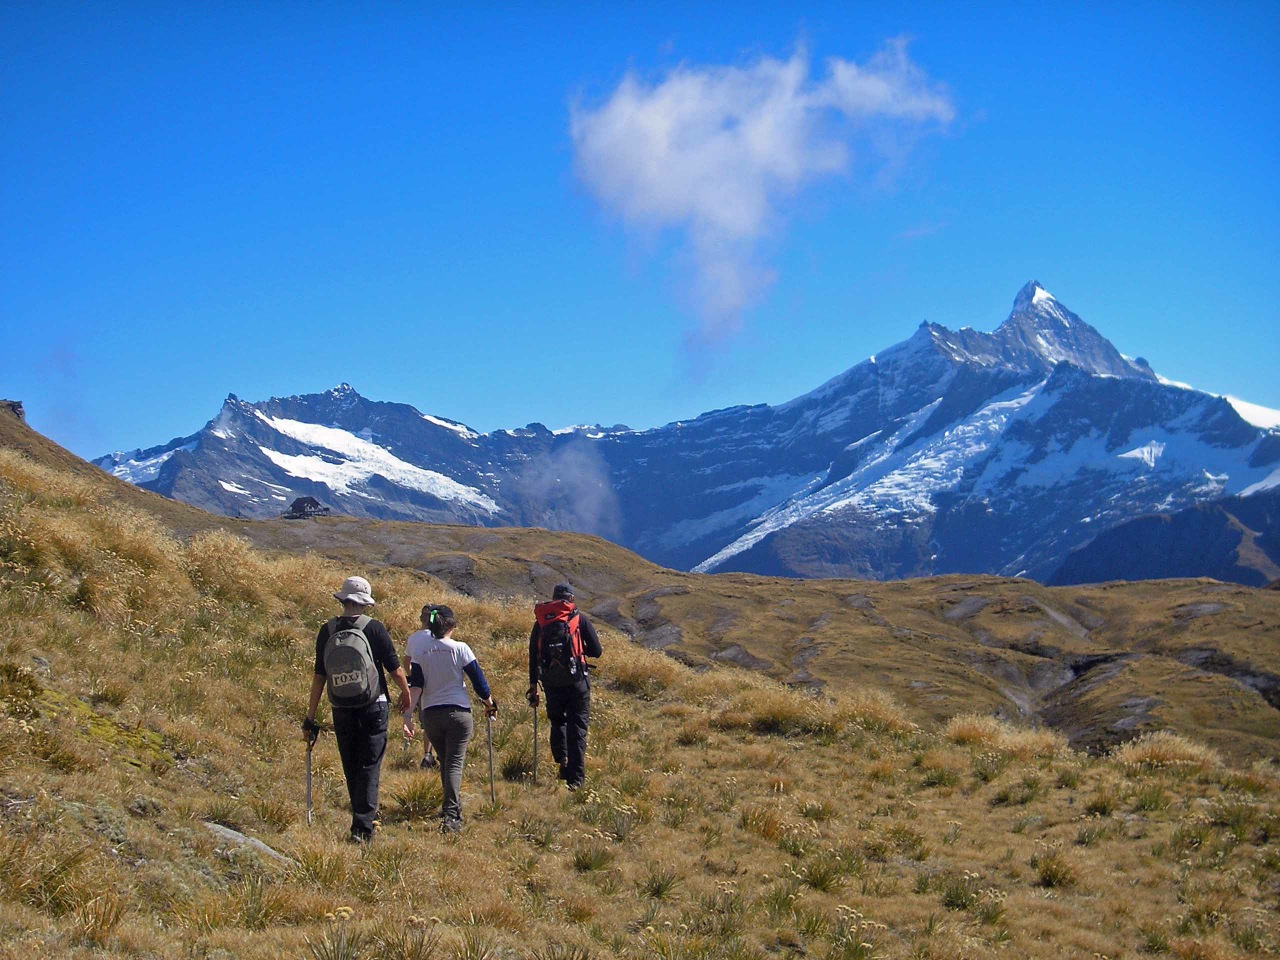 Whare Kea Chalet - Guided Heli-hike with picnic lunch